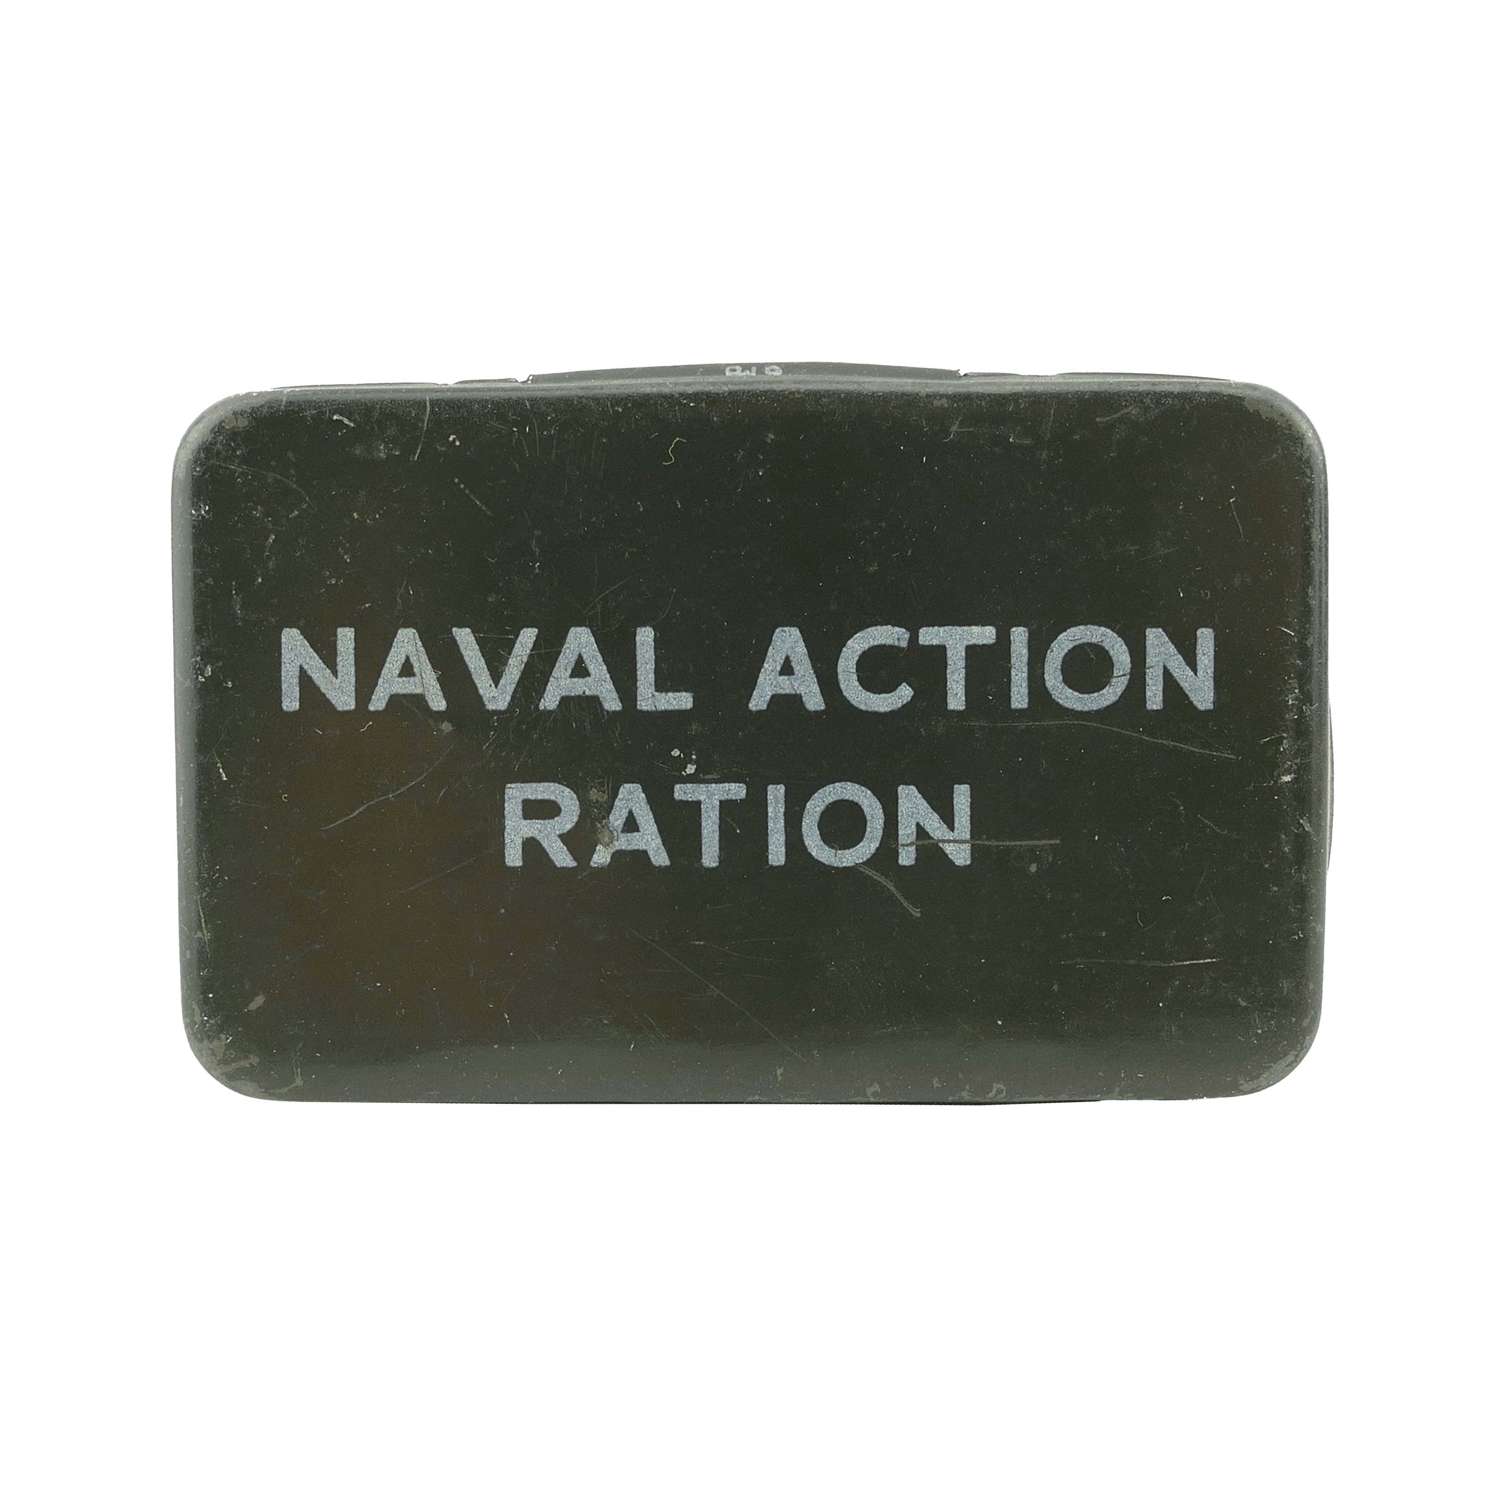 Naval Action Ration tin